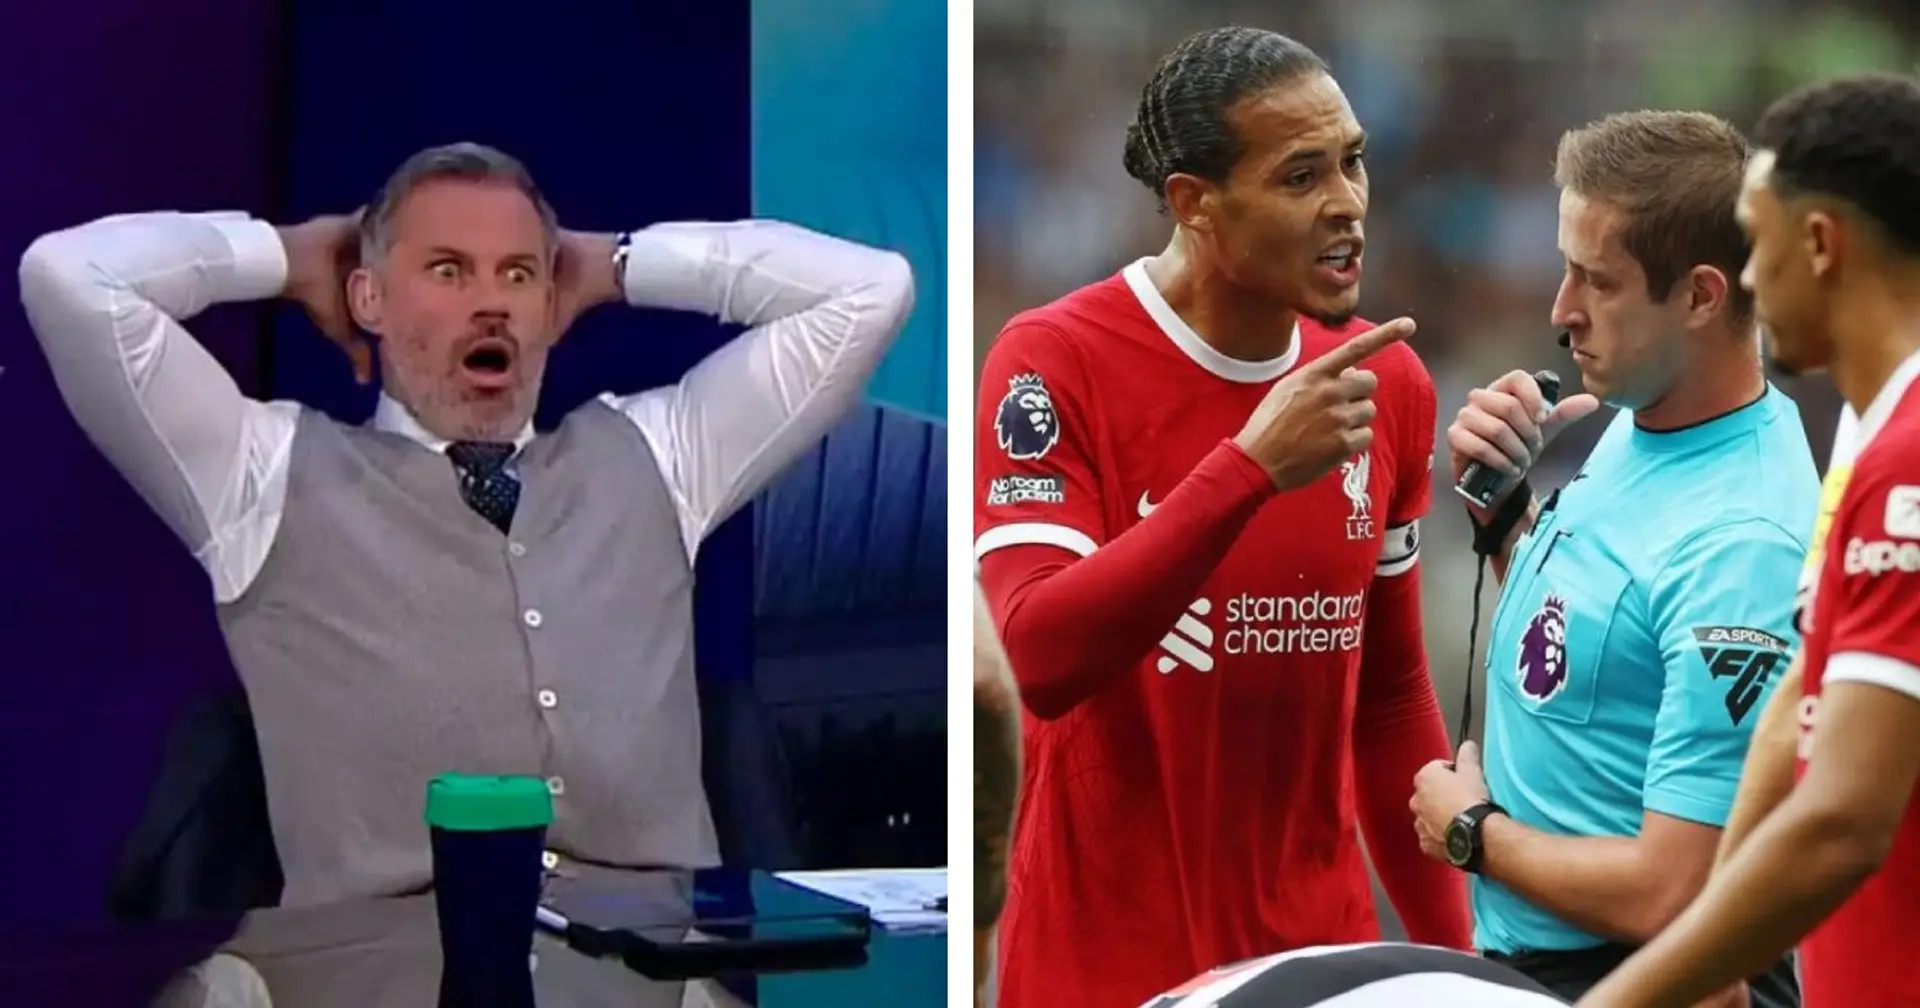 'We don’t know if he has denied a goal scoring opportunity': Carragher slams Van Dijk red card decision